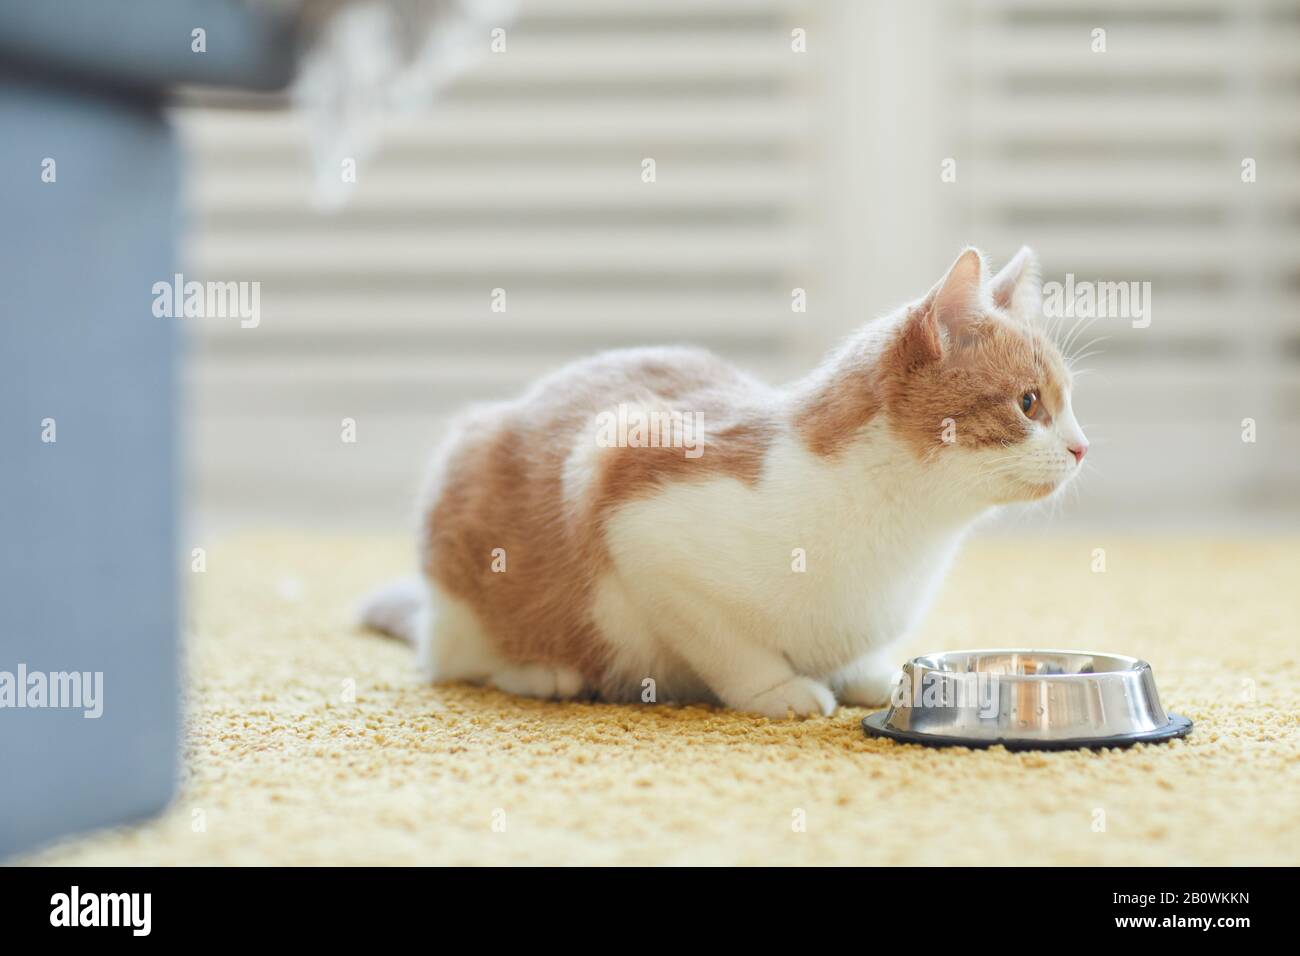 Domestic cat sitting on the floor with her bowl and it's going to eat the meal Stock Photo